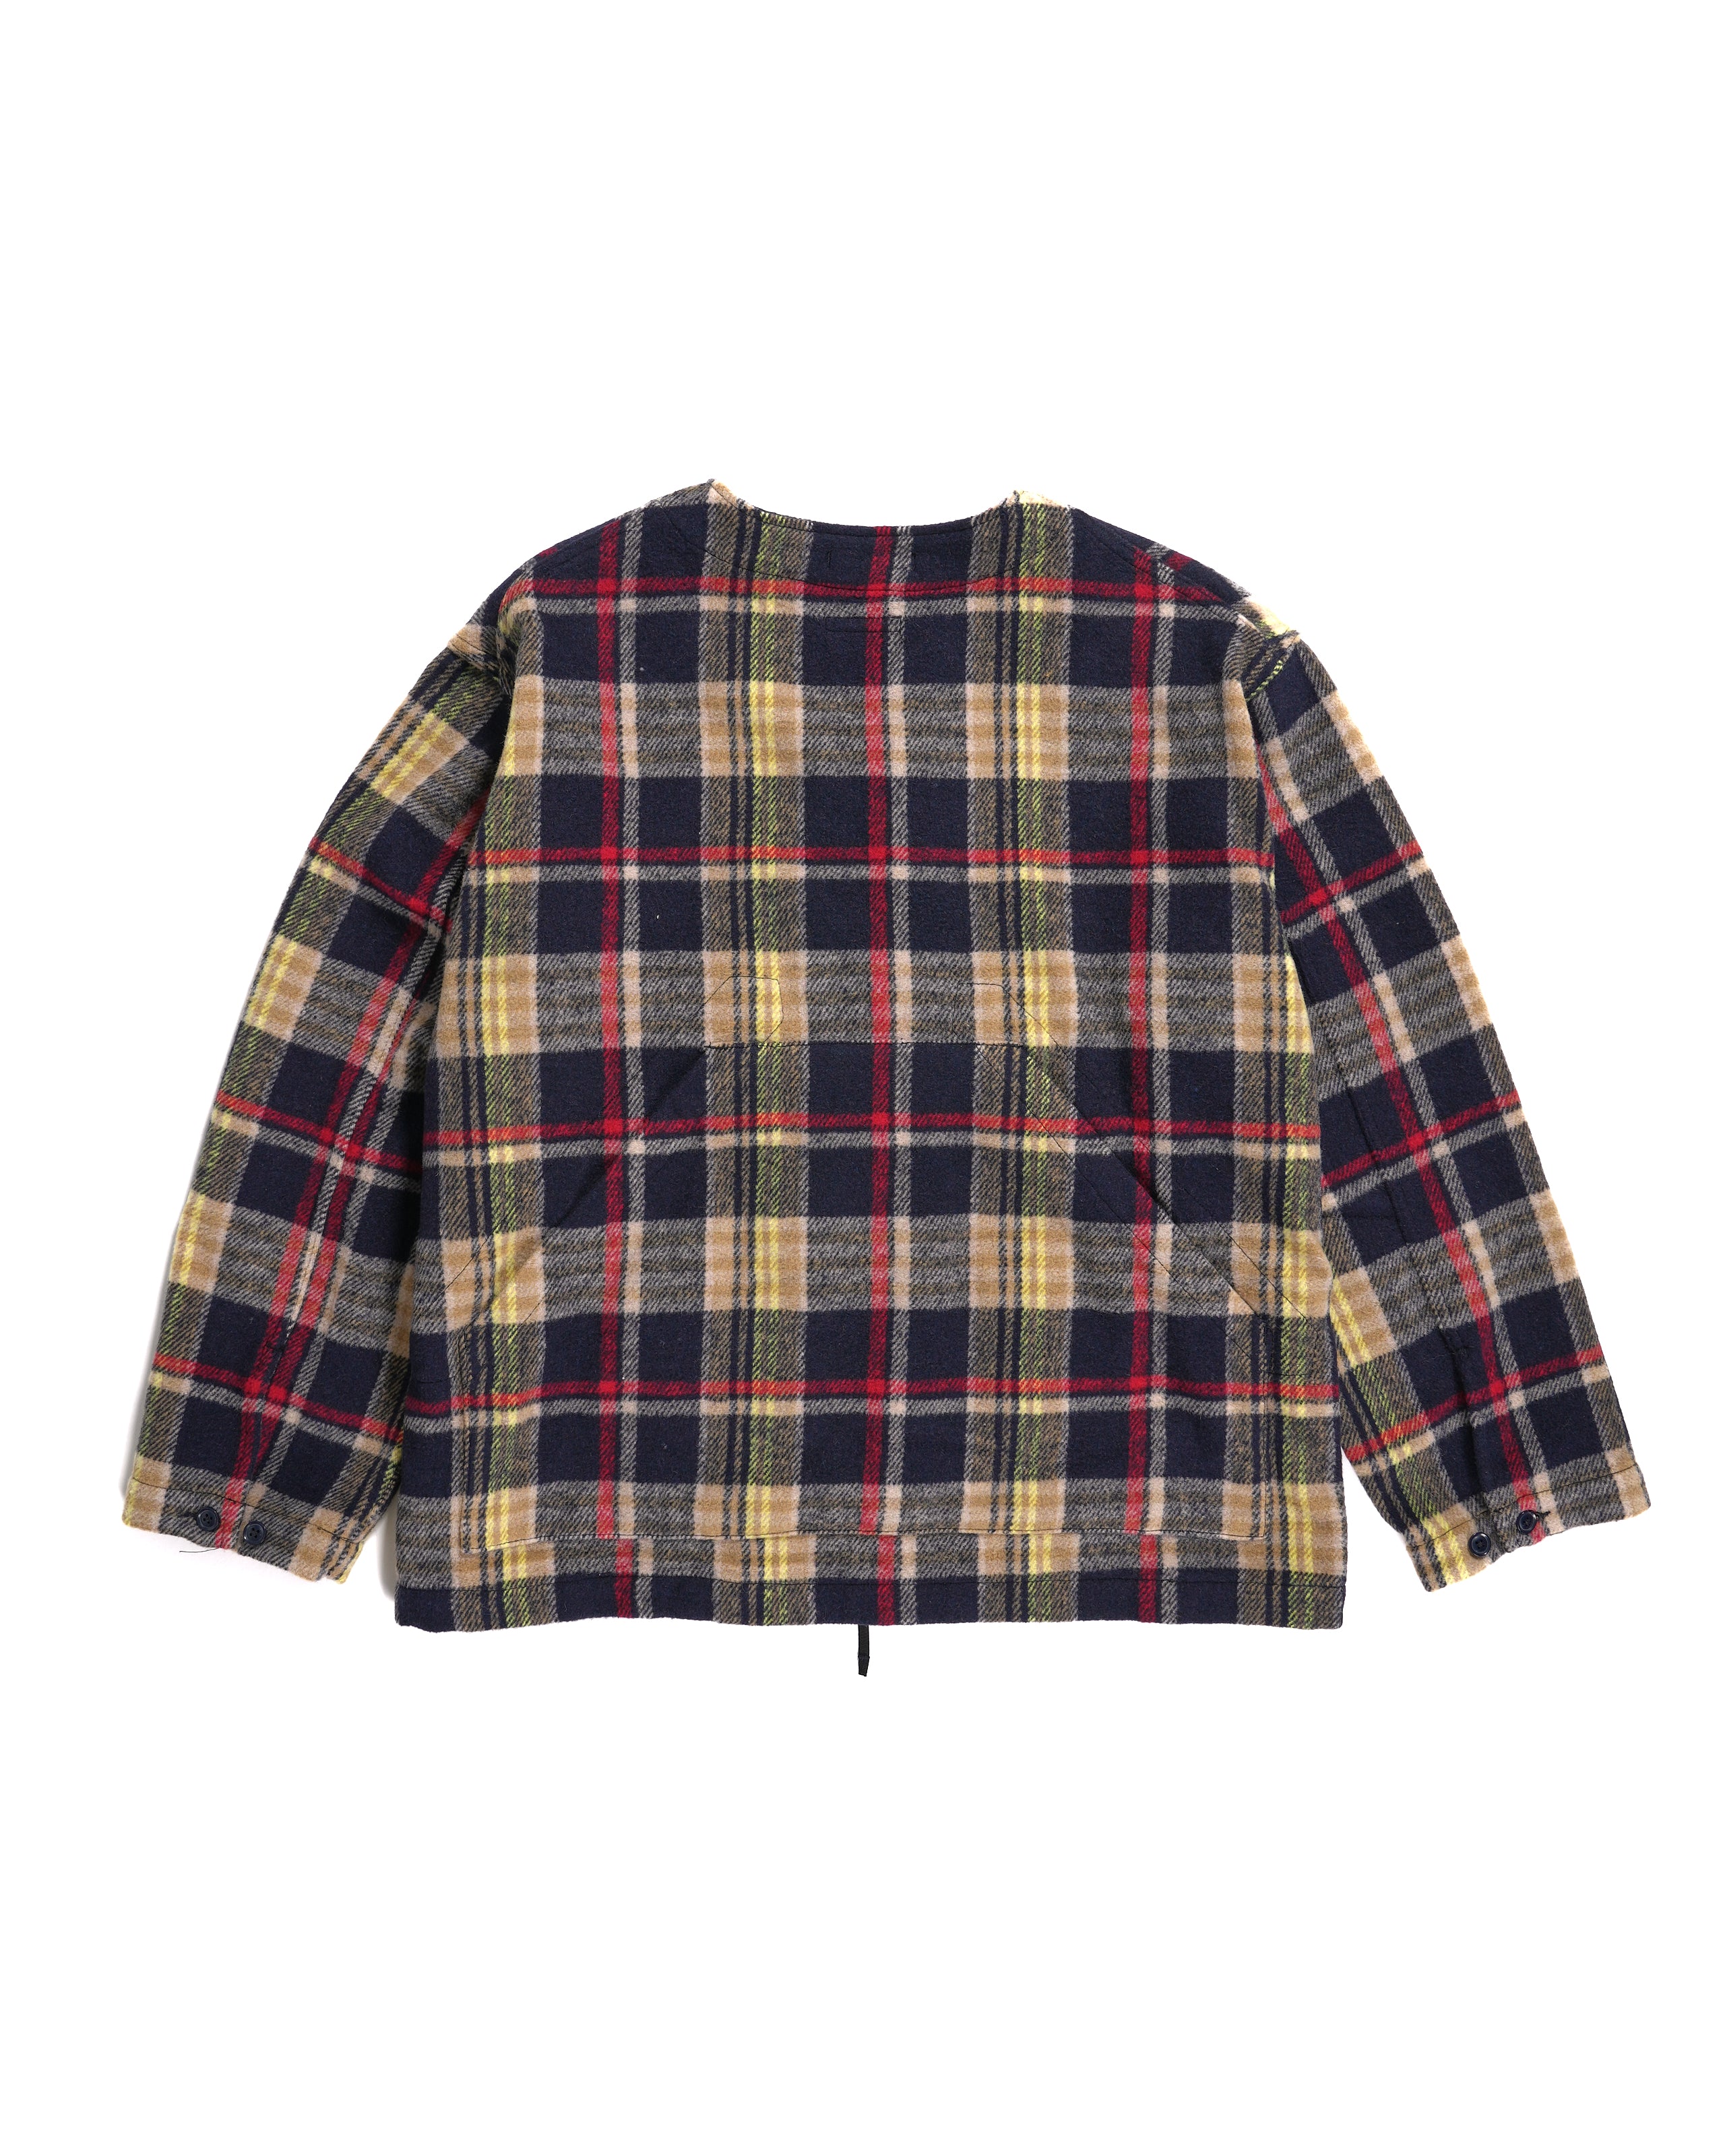 Engineered Garments Shooting Jacket - Navy/Red Polyester Heavy Plaid